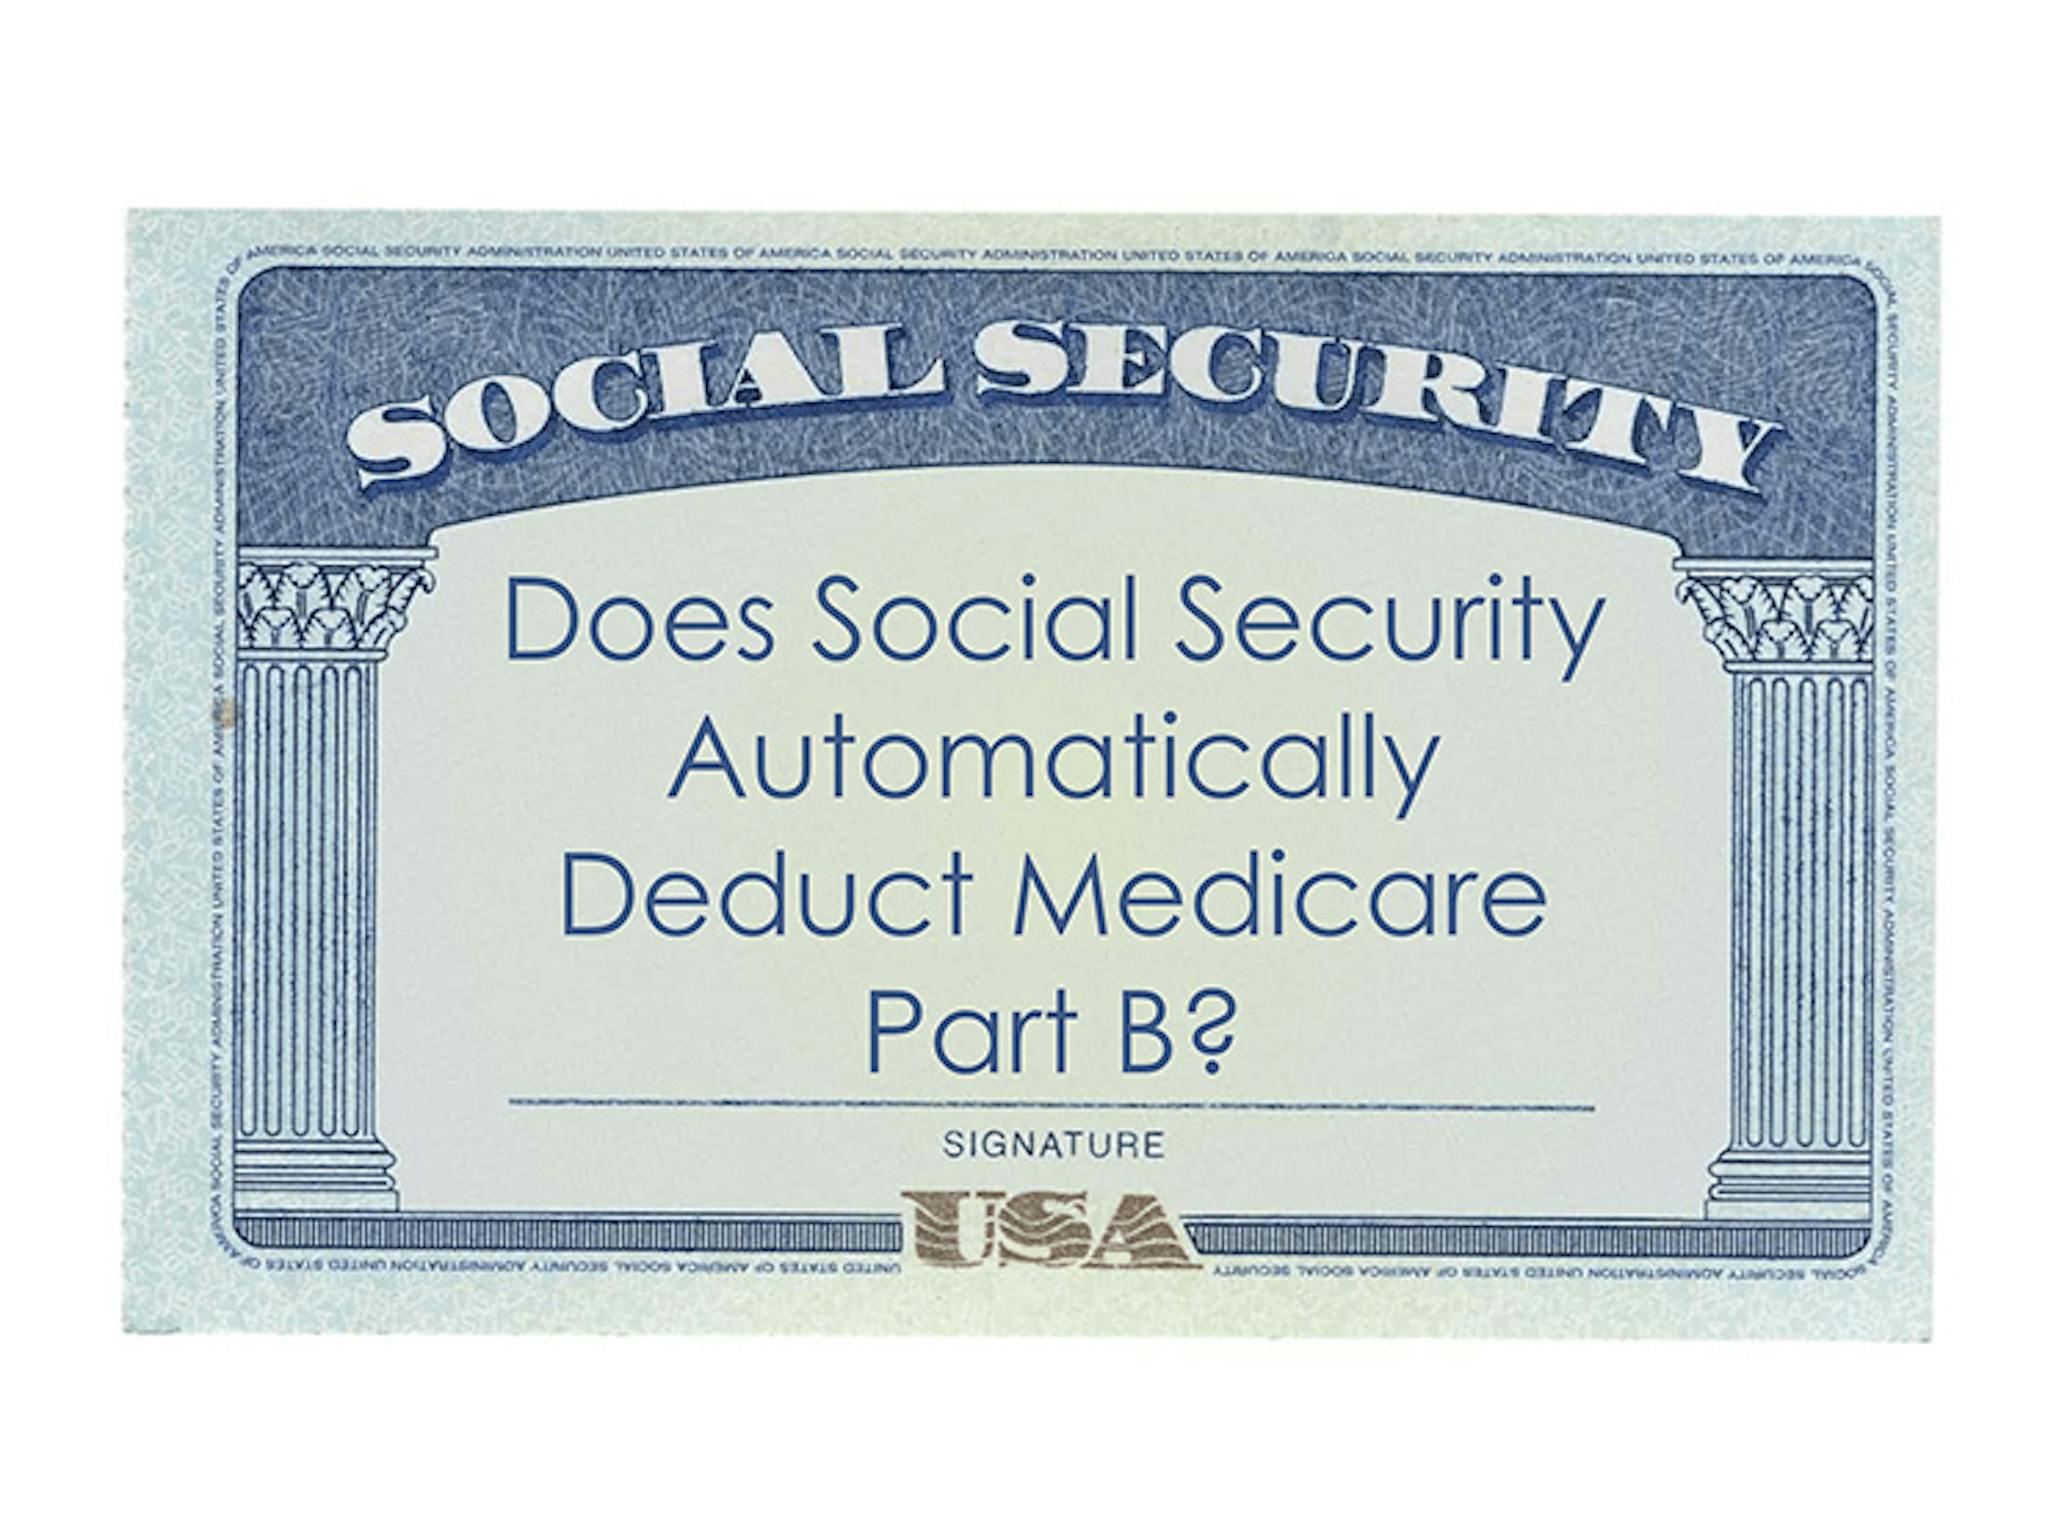 Is Medicare Part B Automatically Deducted from Social Security